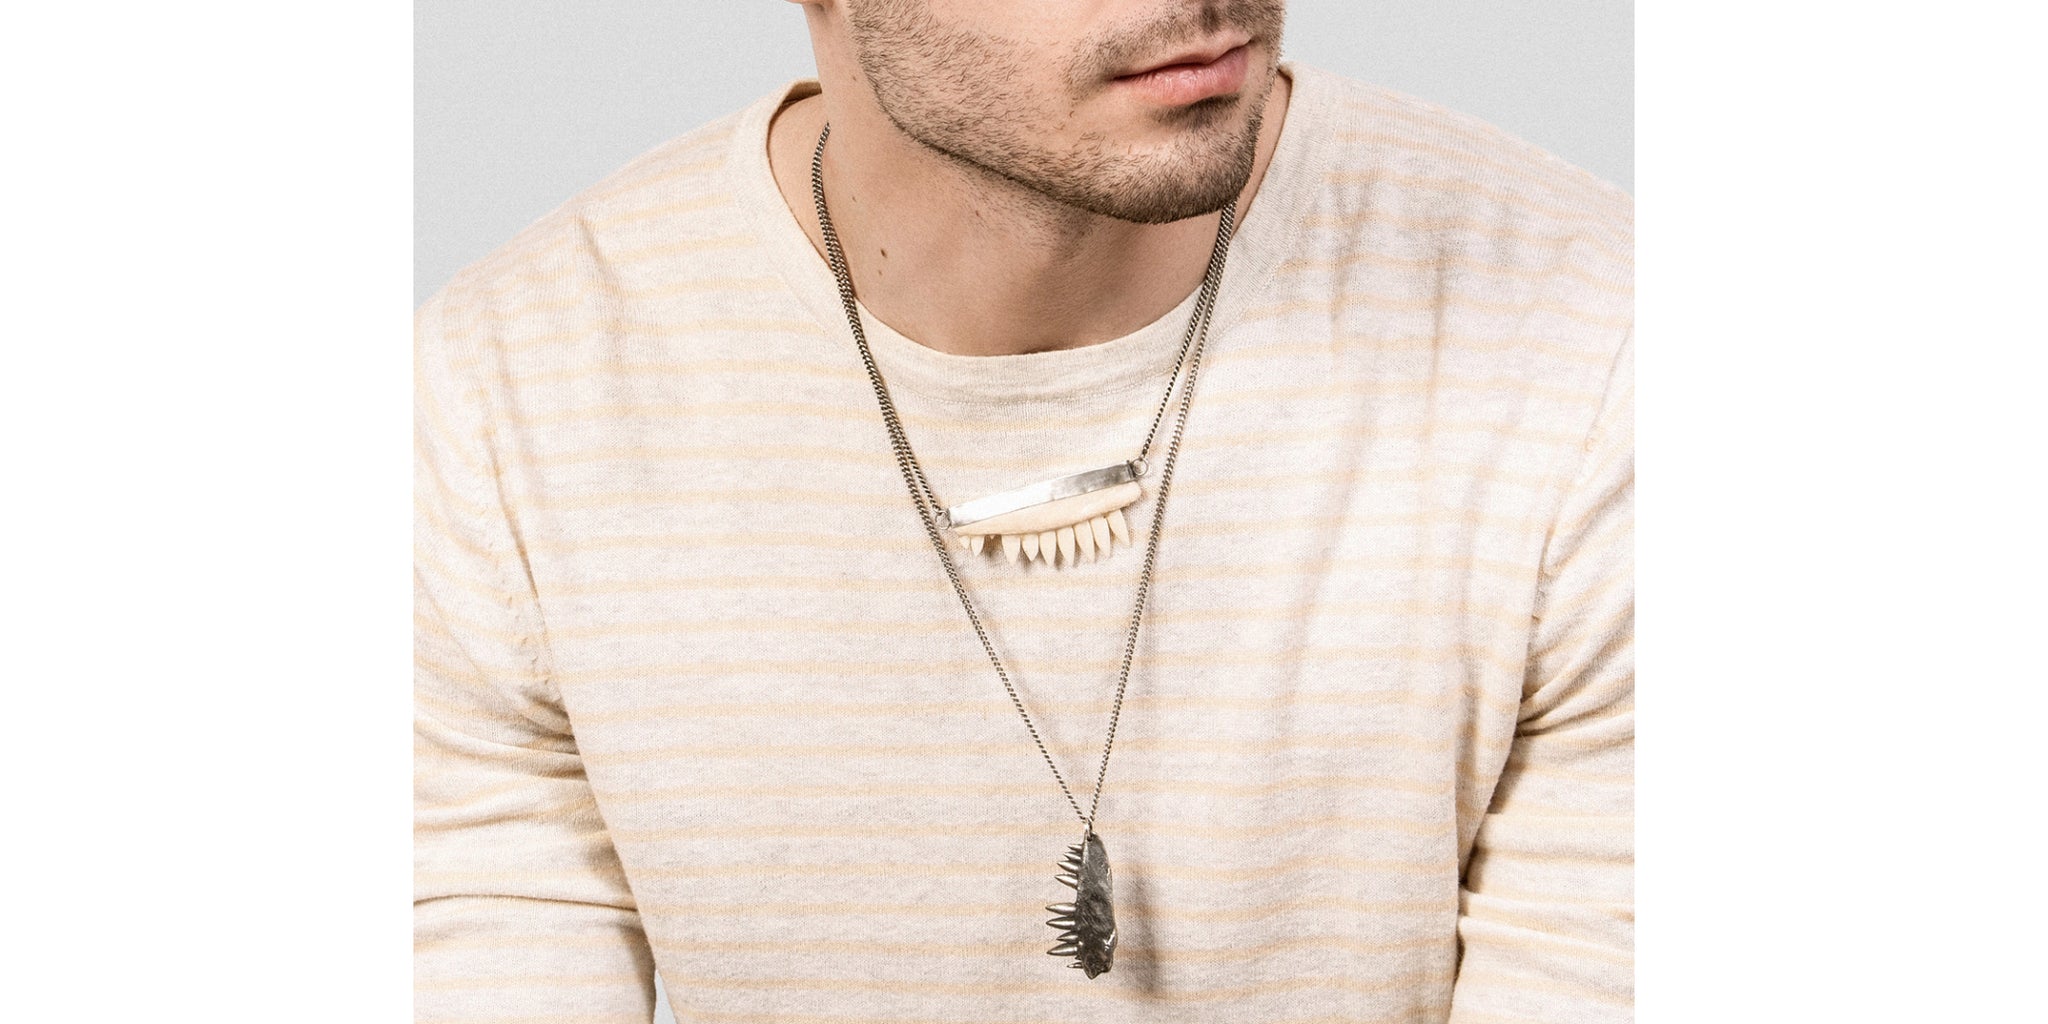 Osso Jaw Necklace - silver